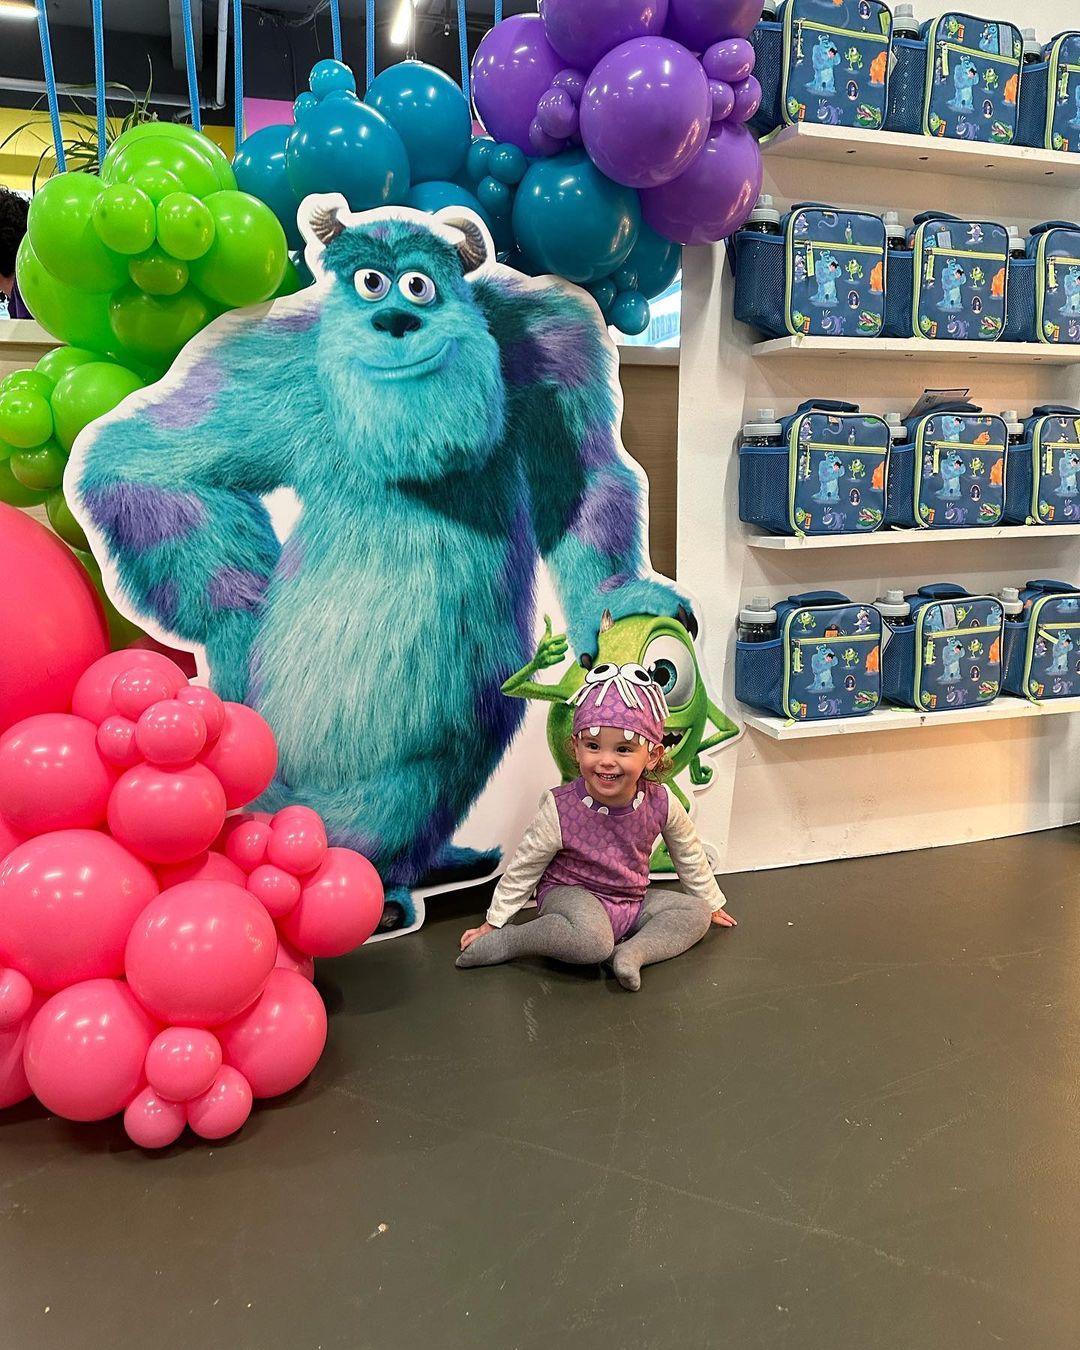 Lala Kent Treats Daughter Ocean To Monster Themed Party For Her Second Birthday